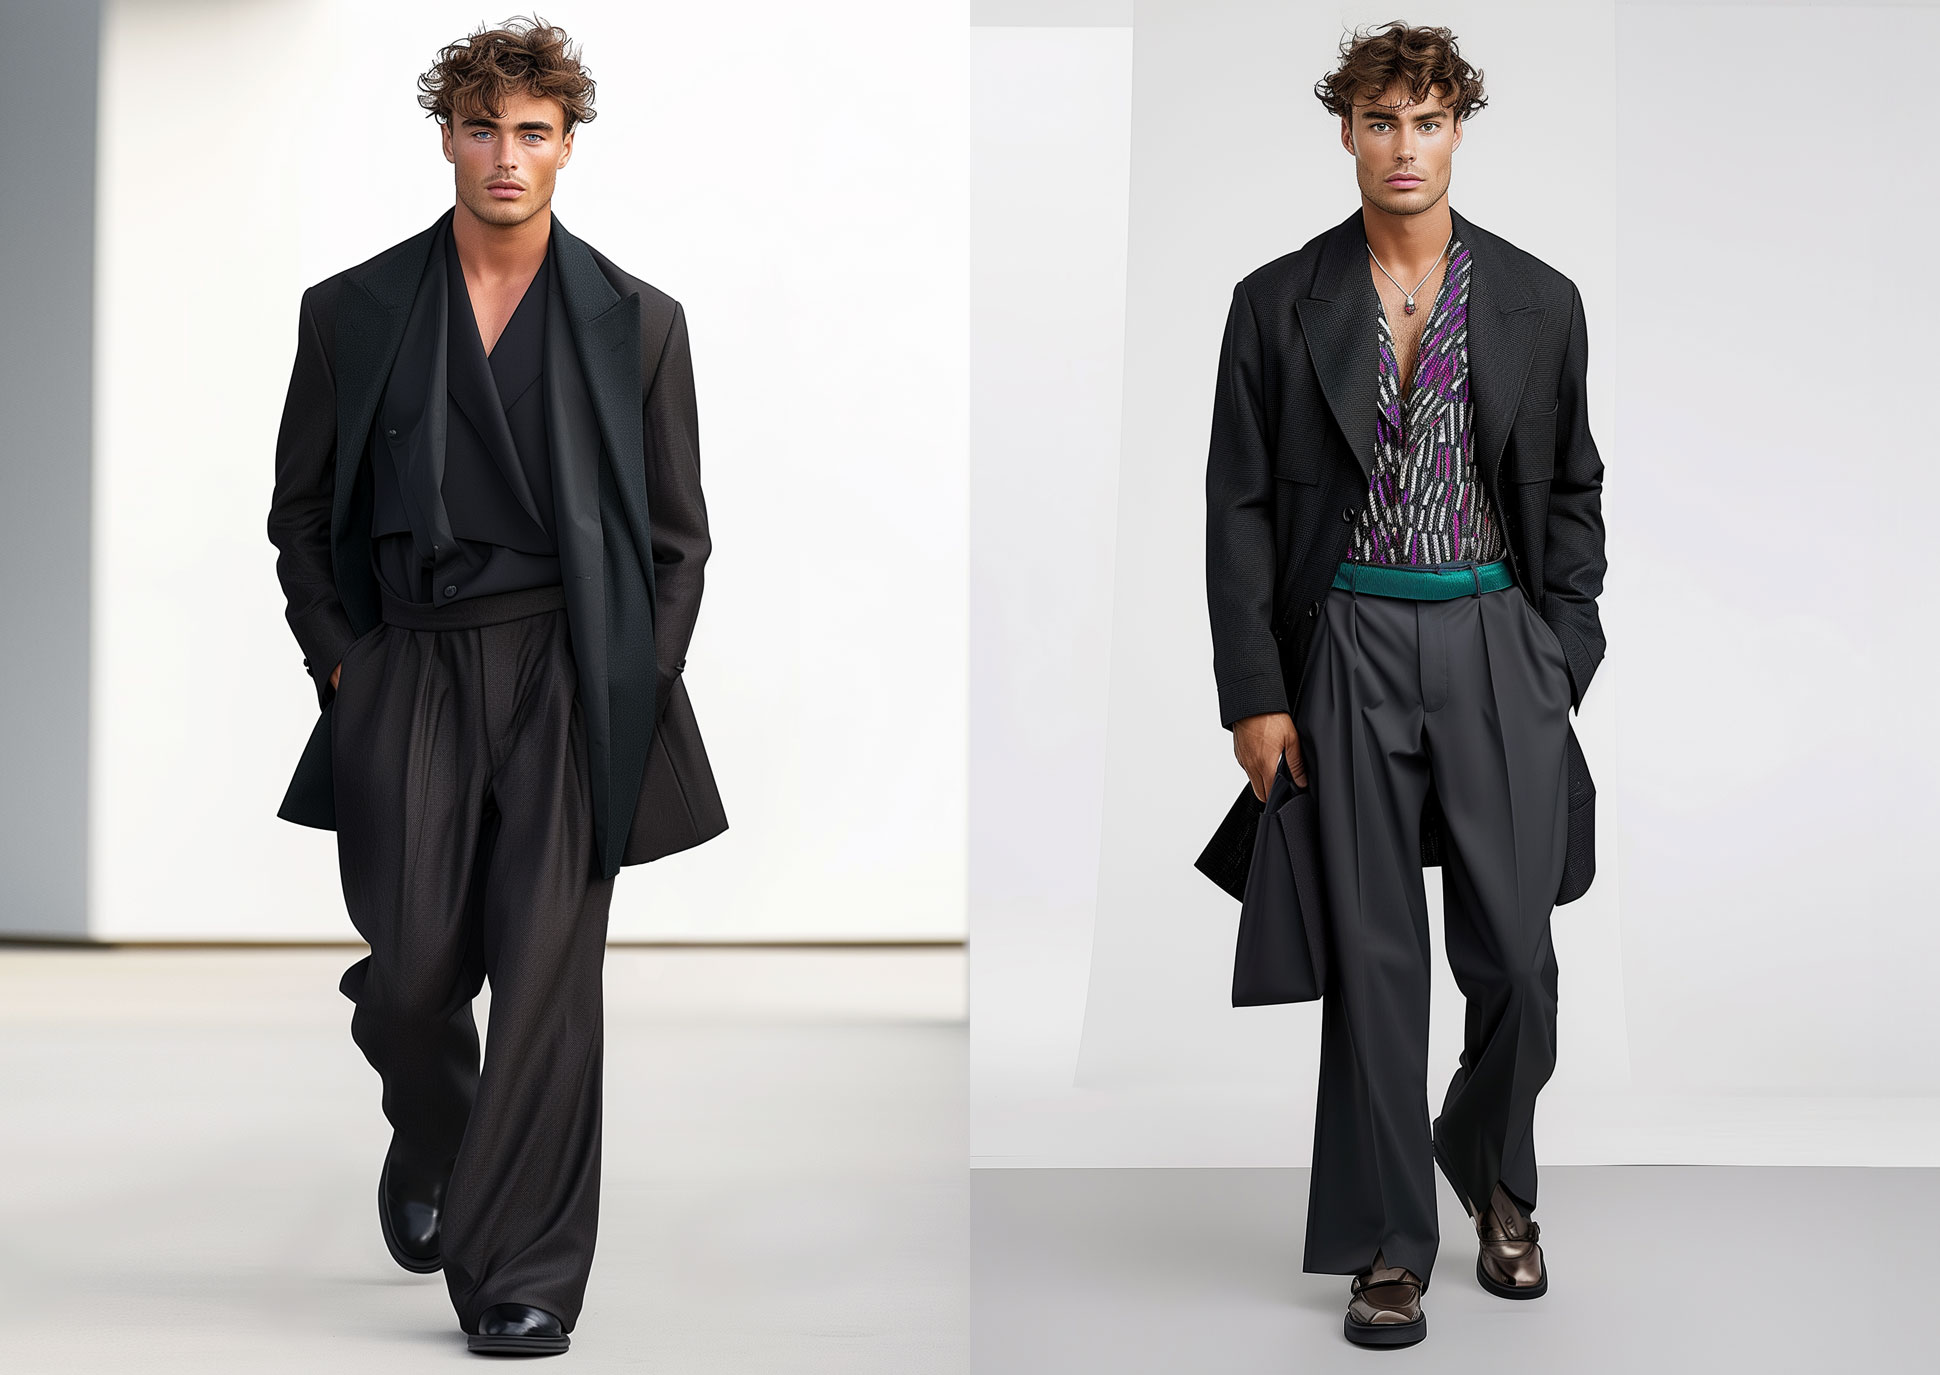 Two Caucasian male high-end fashion models walk on a catwalk wearing a grey with purple outfits consisting of loose fitting blazers and trousers.